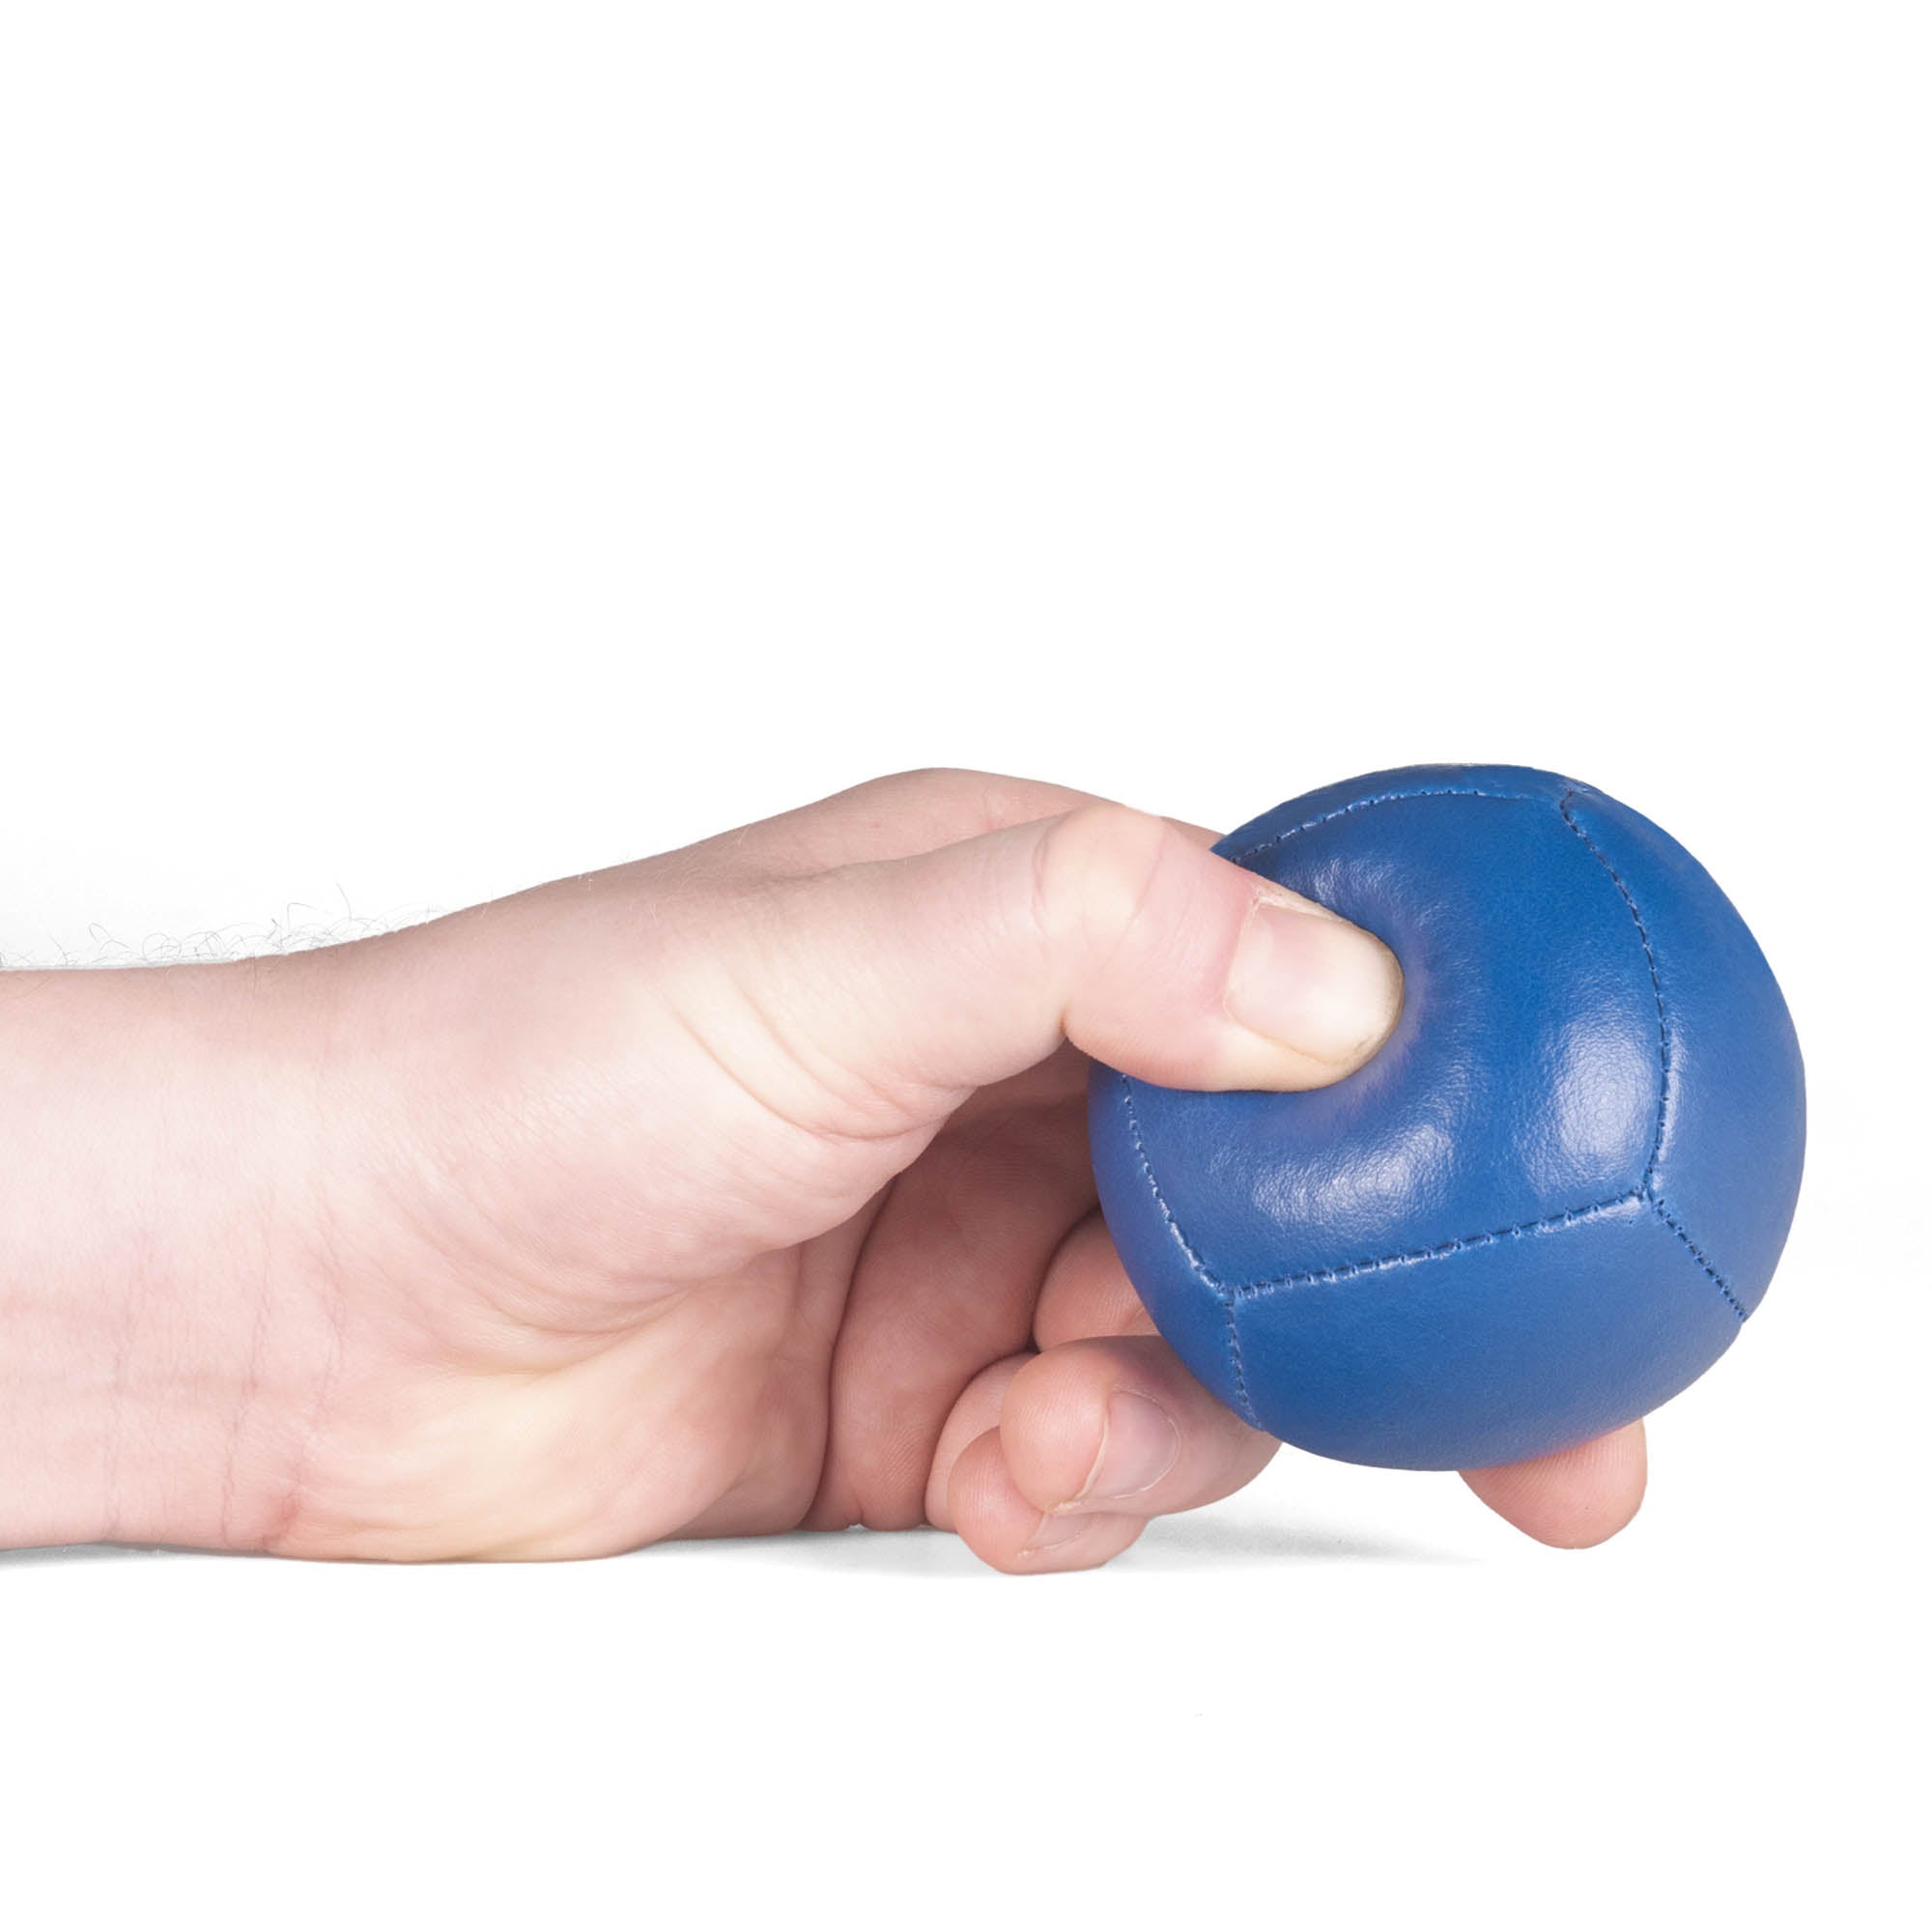 Firetoys blue 110g thud juggling ball being squeezed